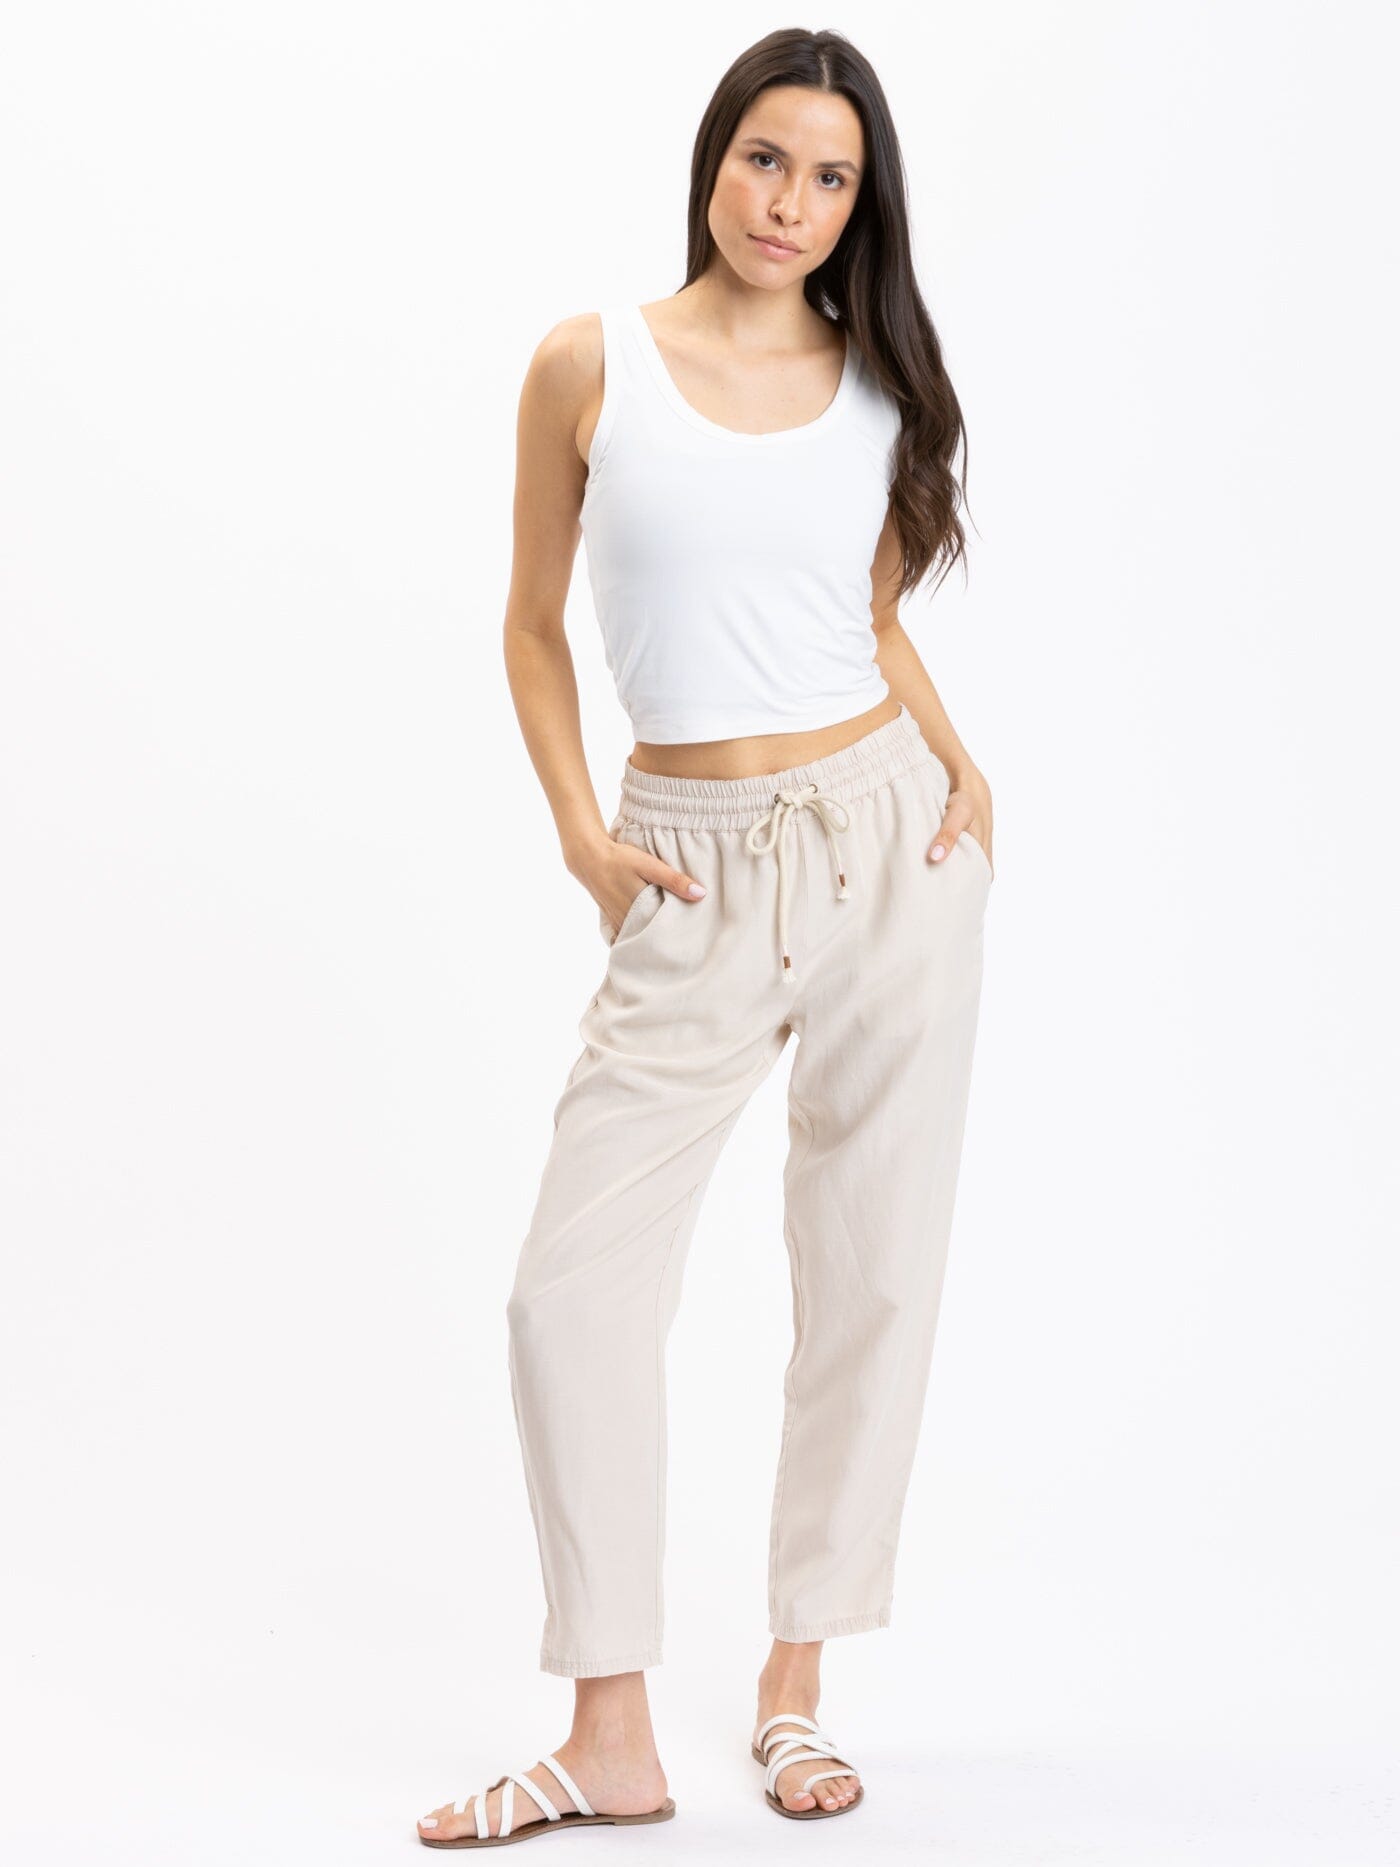 Linen And Things  Dusty Blush Linen Pant Set – eNVious Threads